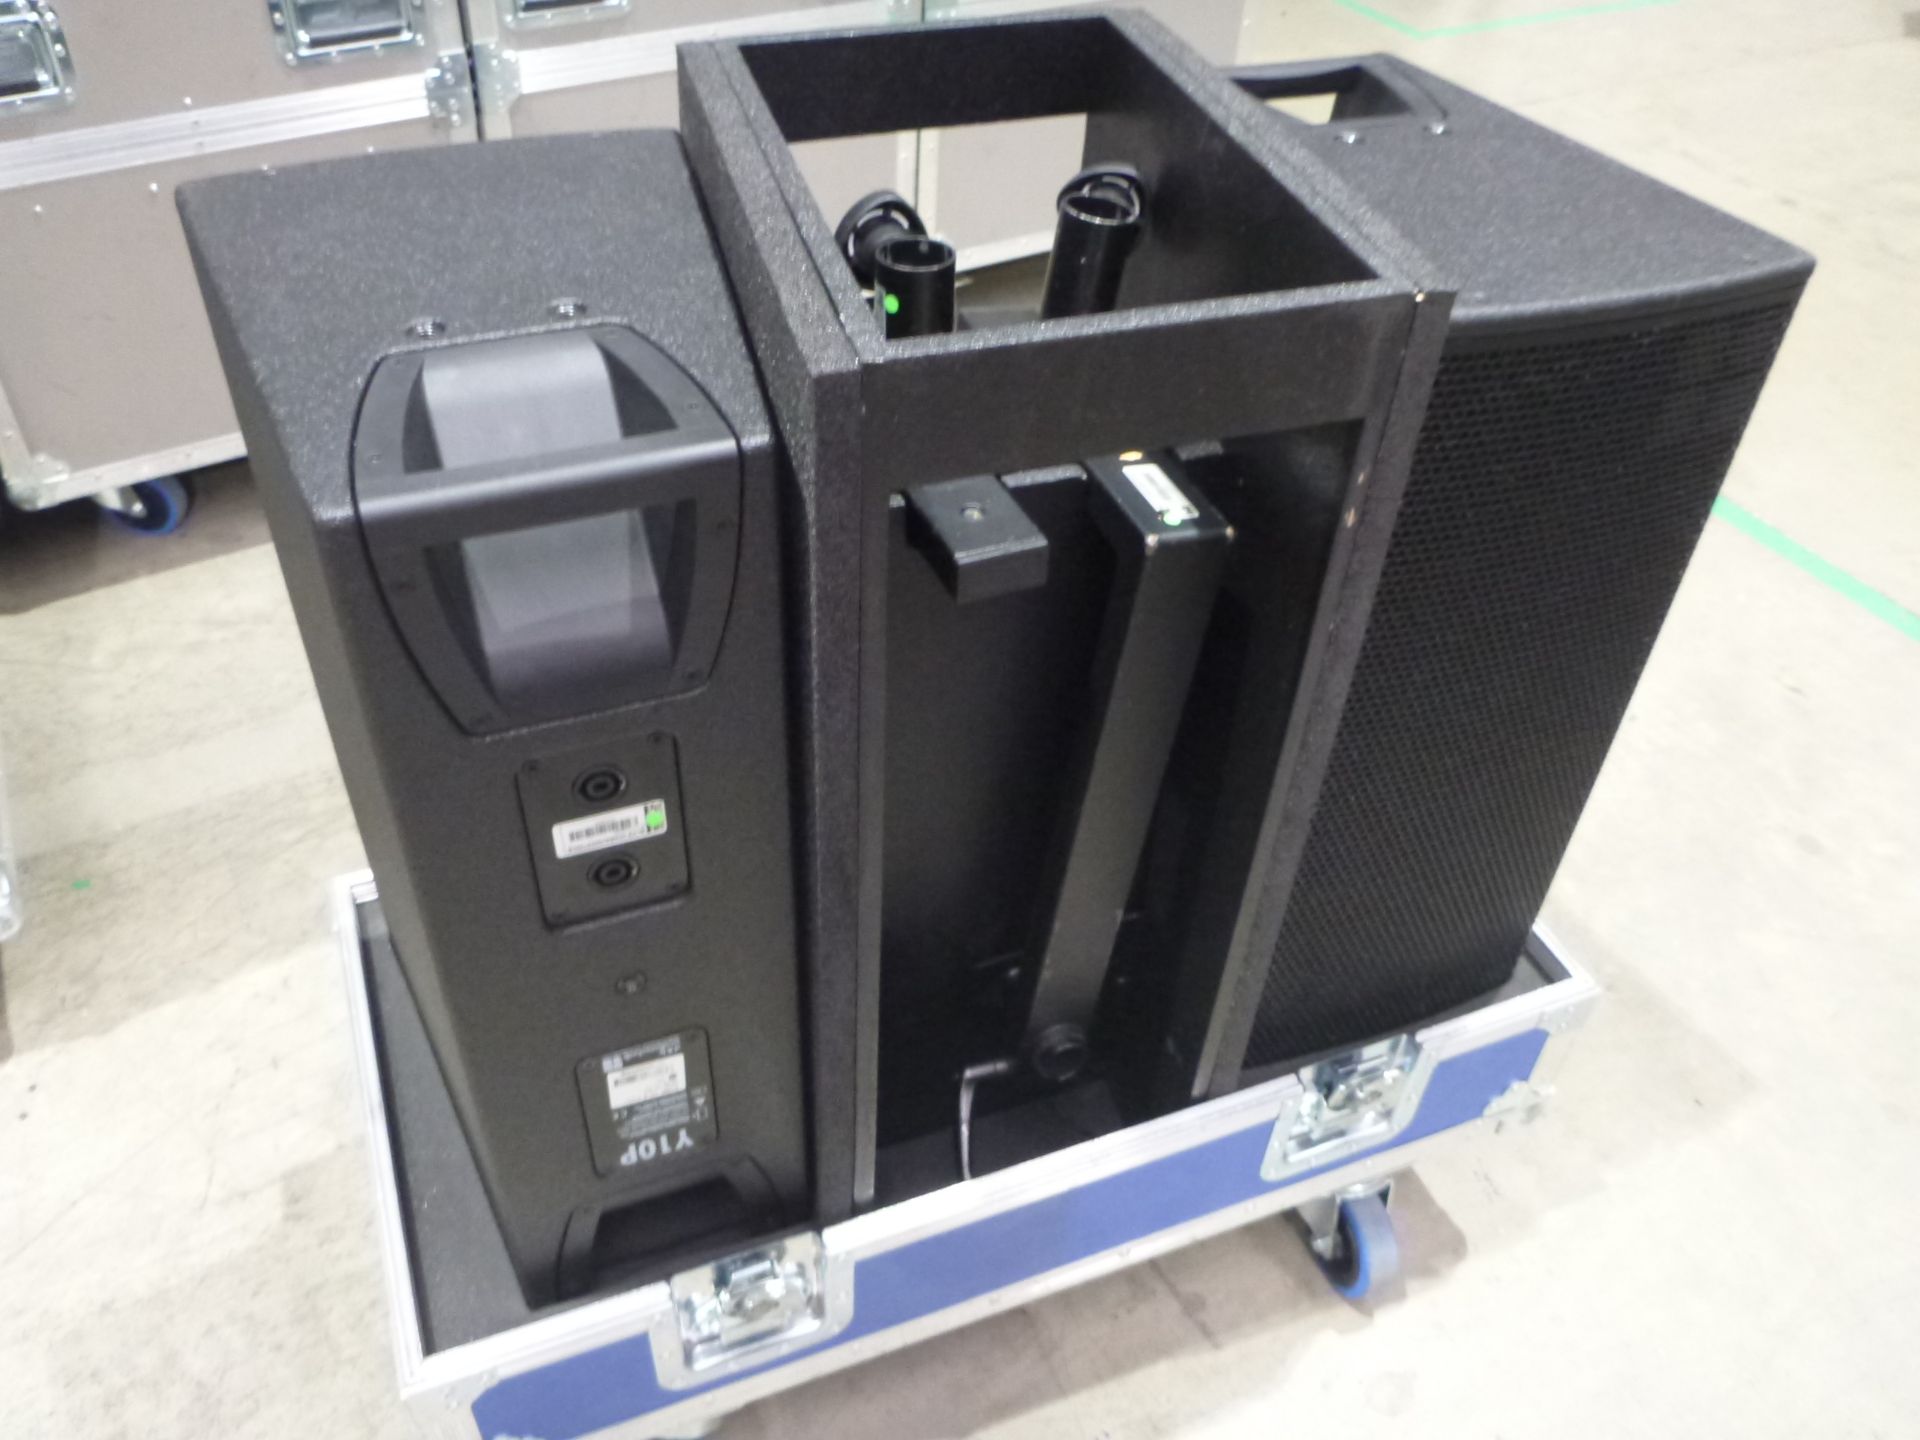 D & B Audiotecknik Y10P Loudspeakers (Pair) In flight case with flying frame, top hat and safety - Image 2 of 8